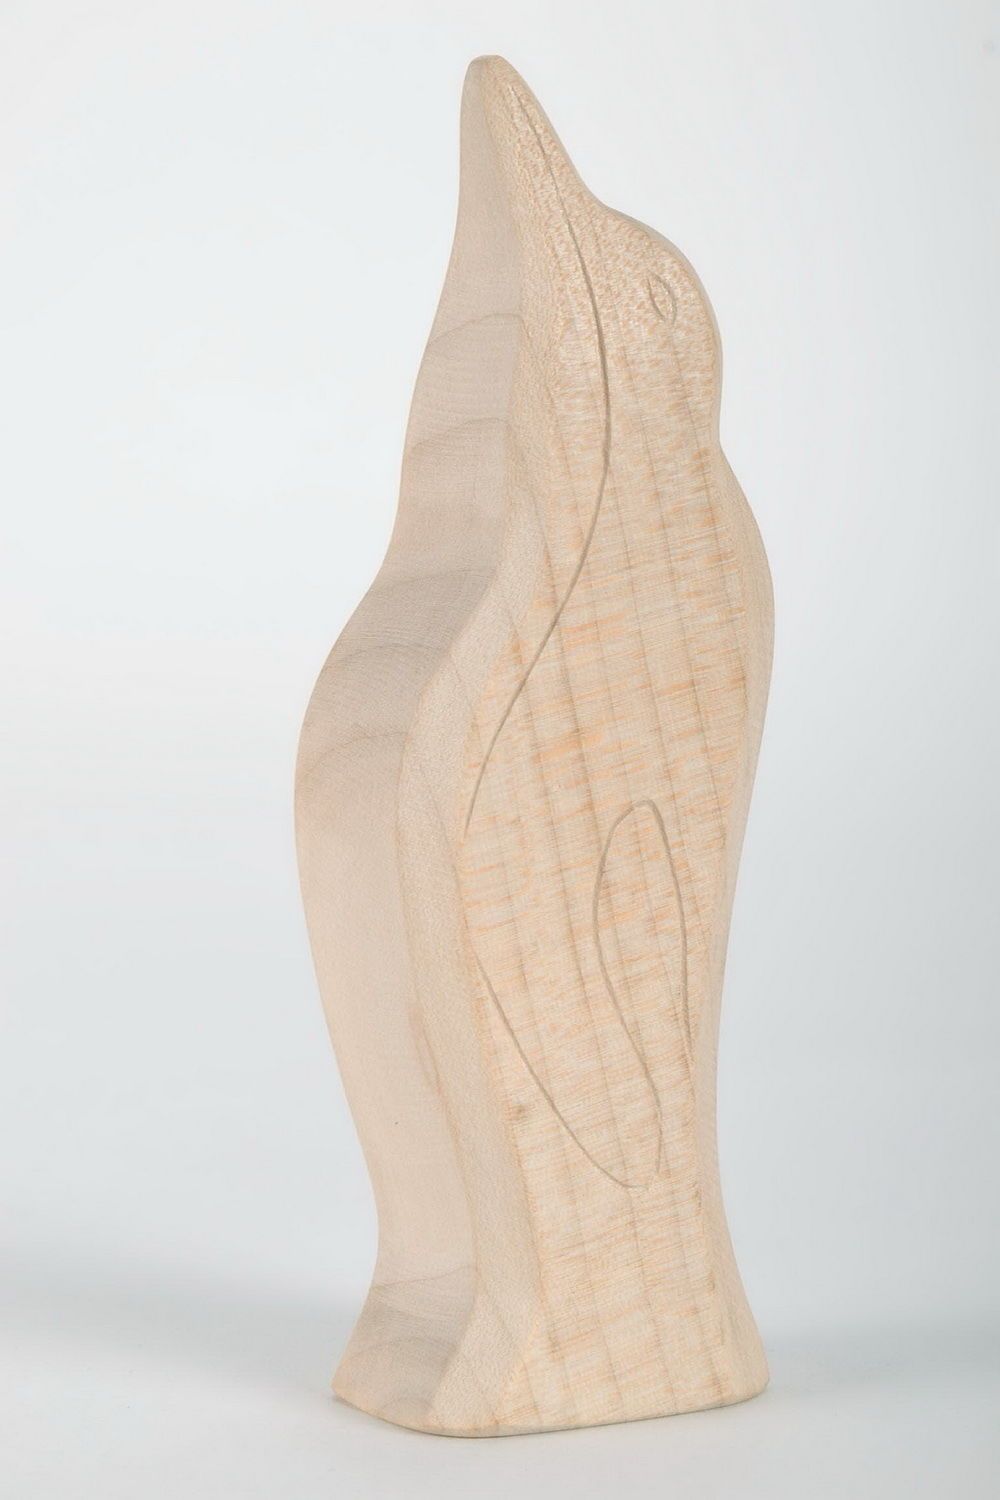 Statuette cut from wood Penguin photo 3